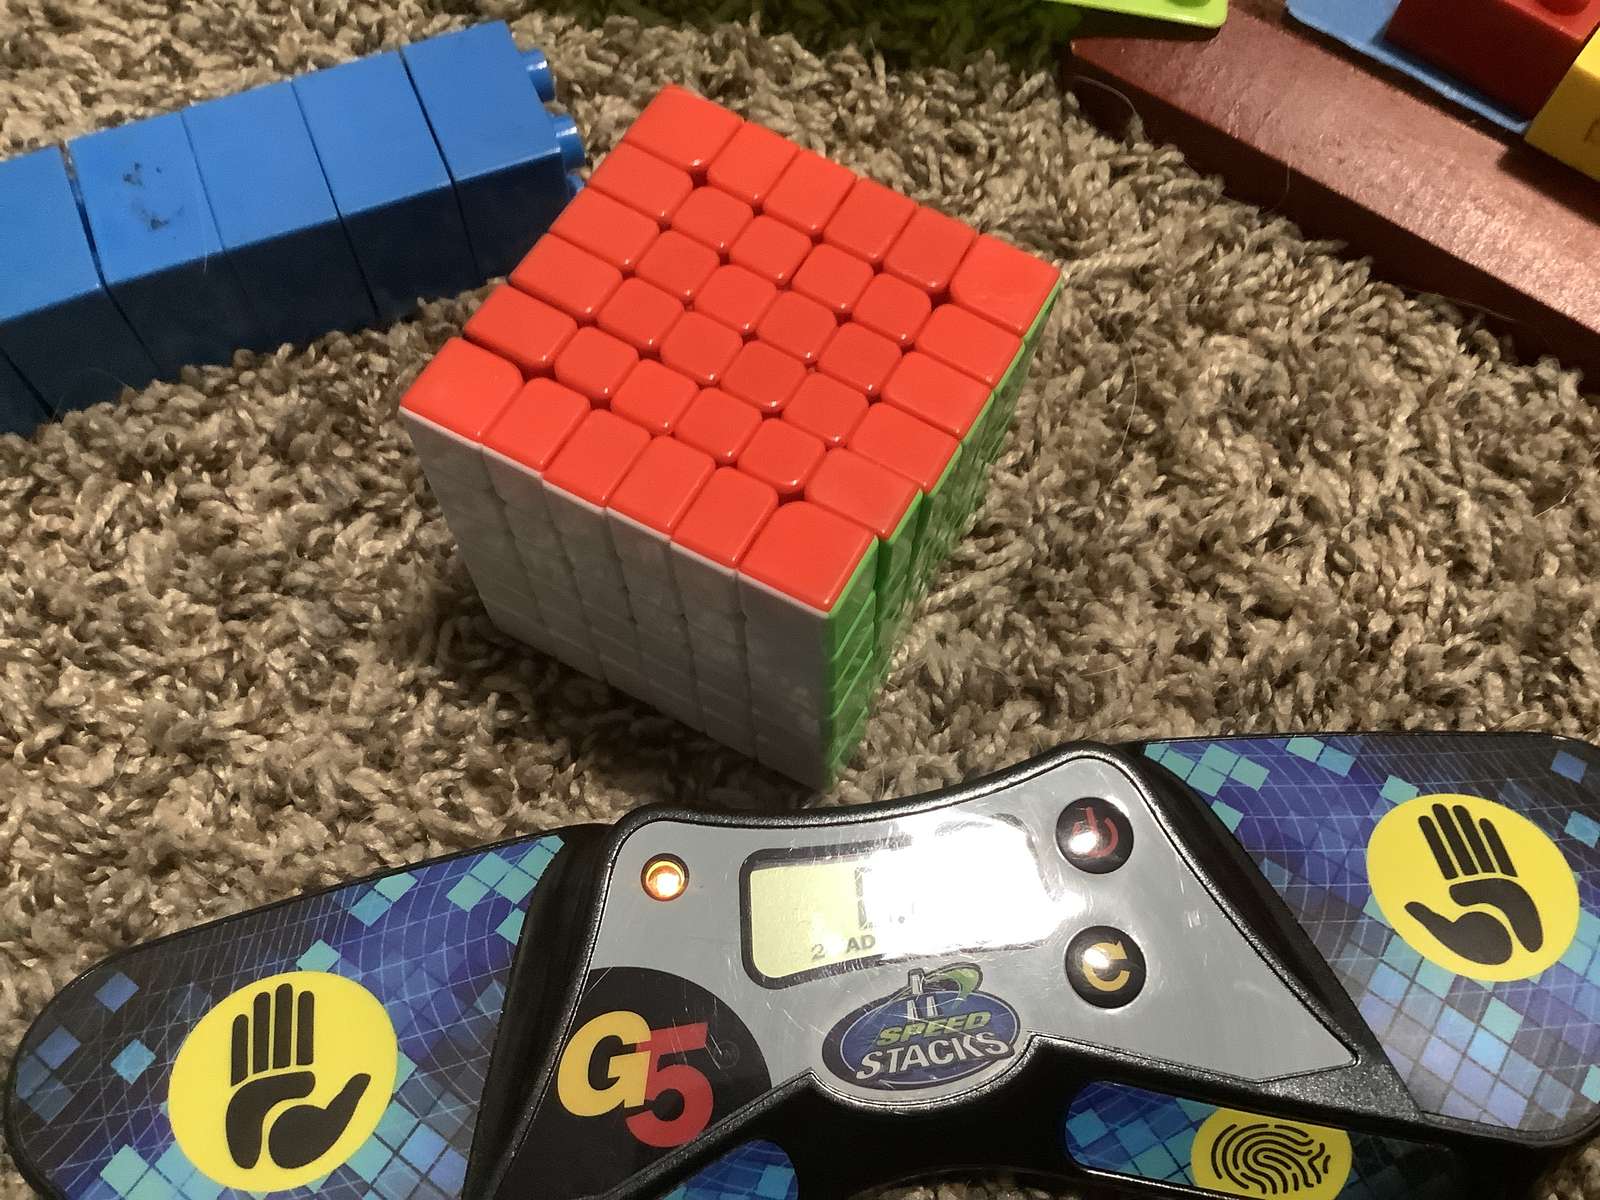 My 6x6 is solved online puzzle